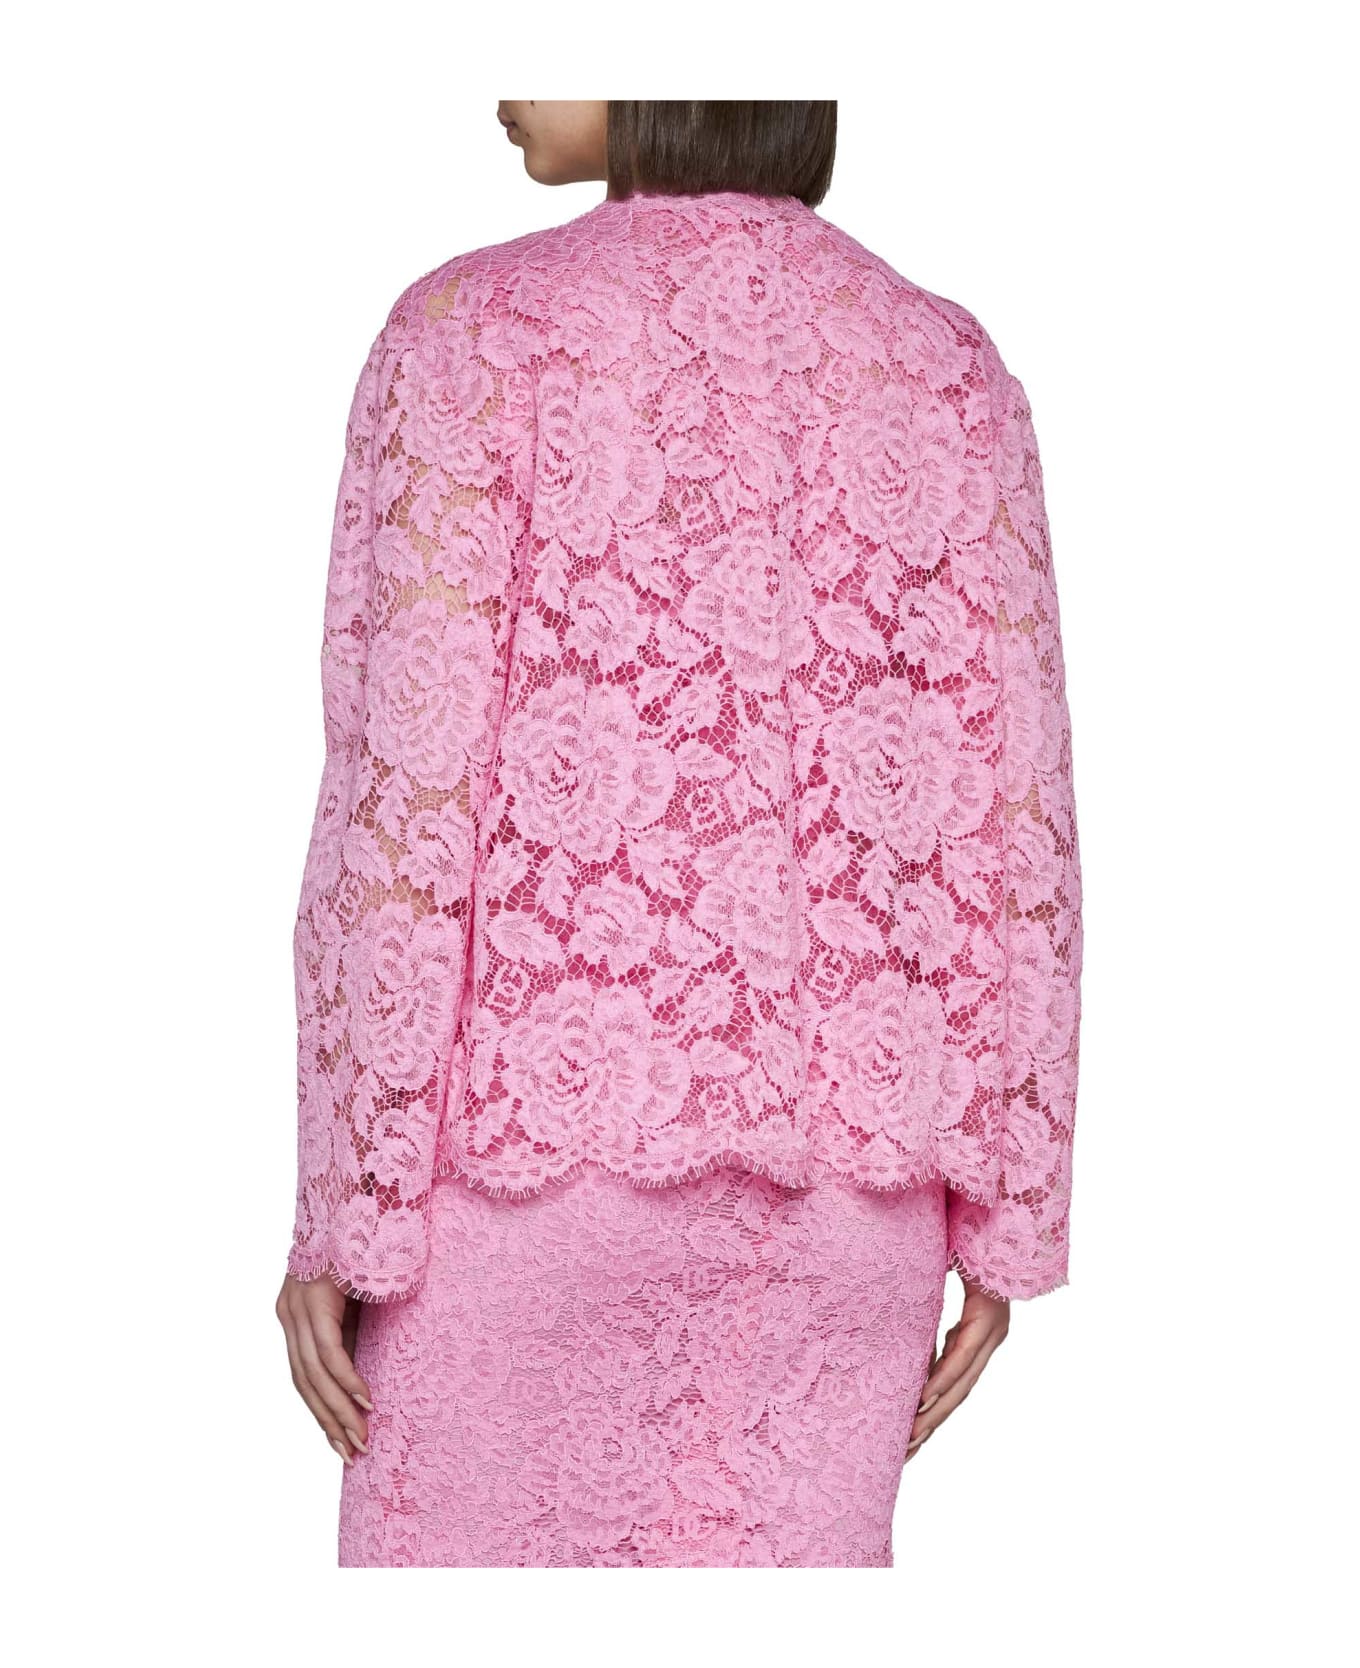 Dolce & Gabbana Laced Buttoned Blouse - Rosa 2